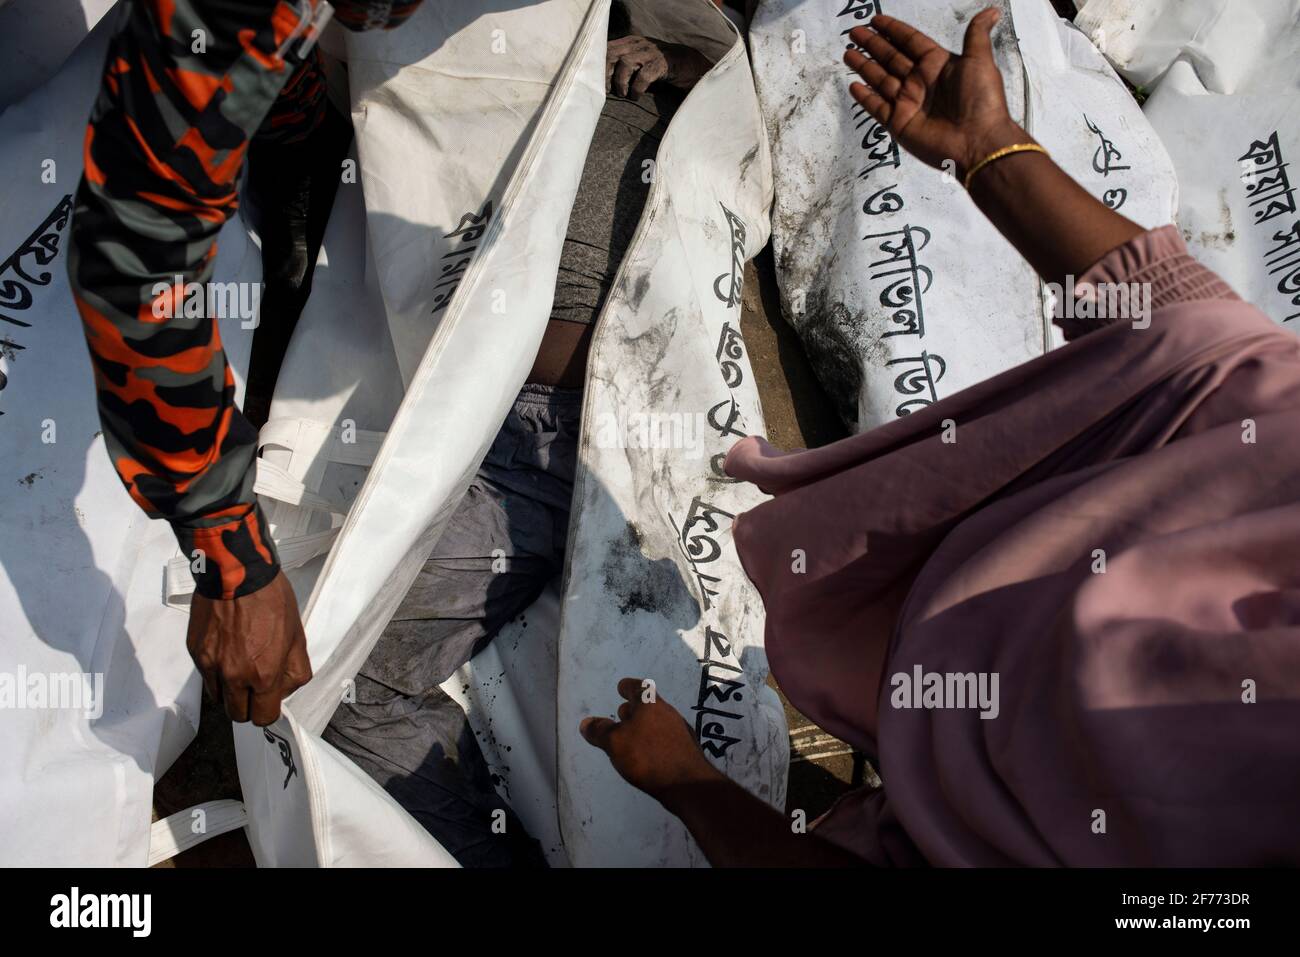 (EDITORS NOTE: Image depicts death)A woman identifies the dead body of her relative who got killed in the boat crush at Shitalakshya River. A Bangladeshi ferry capsized after colliding with a cargo vessel on Sunday in Shitalakkhya river south of the capital Dhaka, leaving at least 26 people dead and a few still missing. Stock Photo